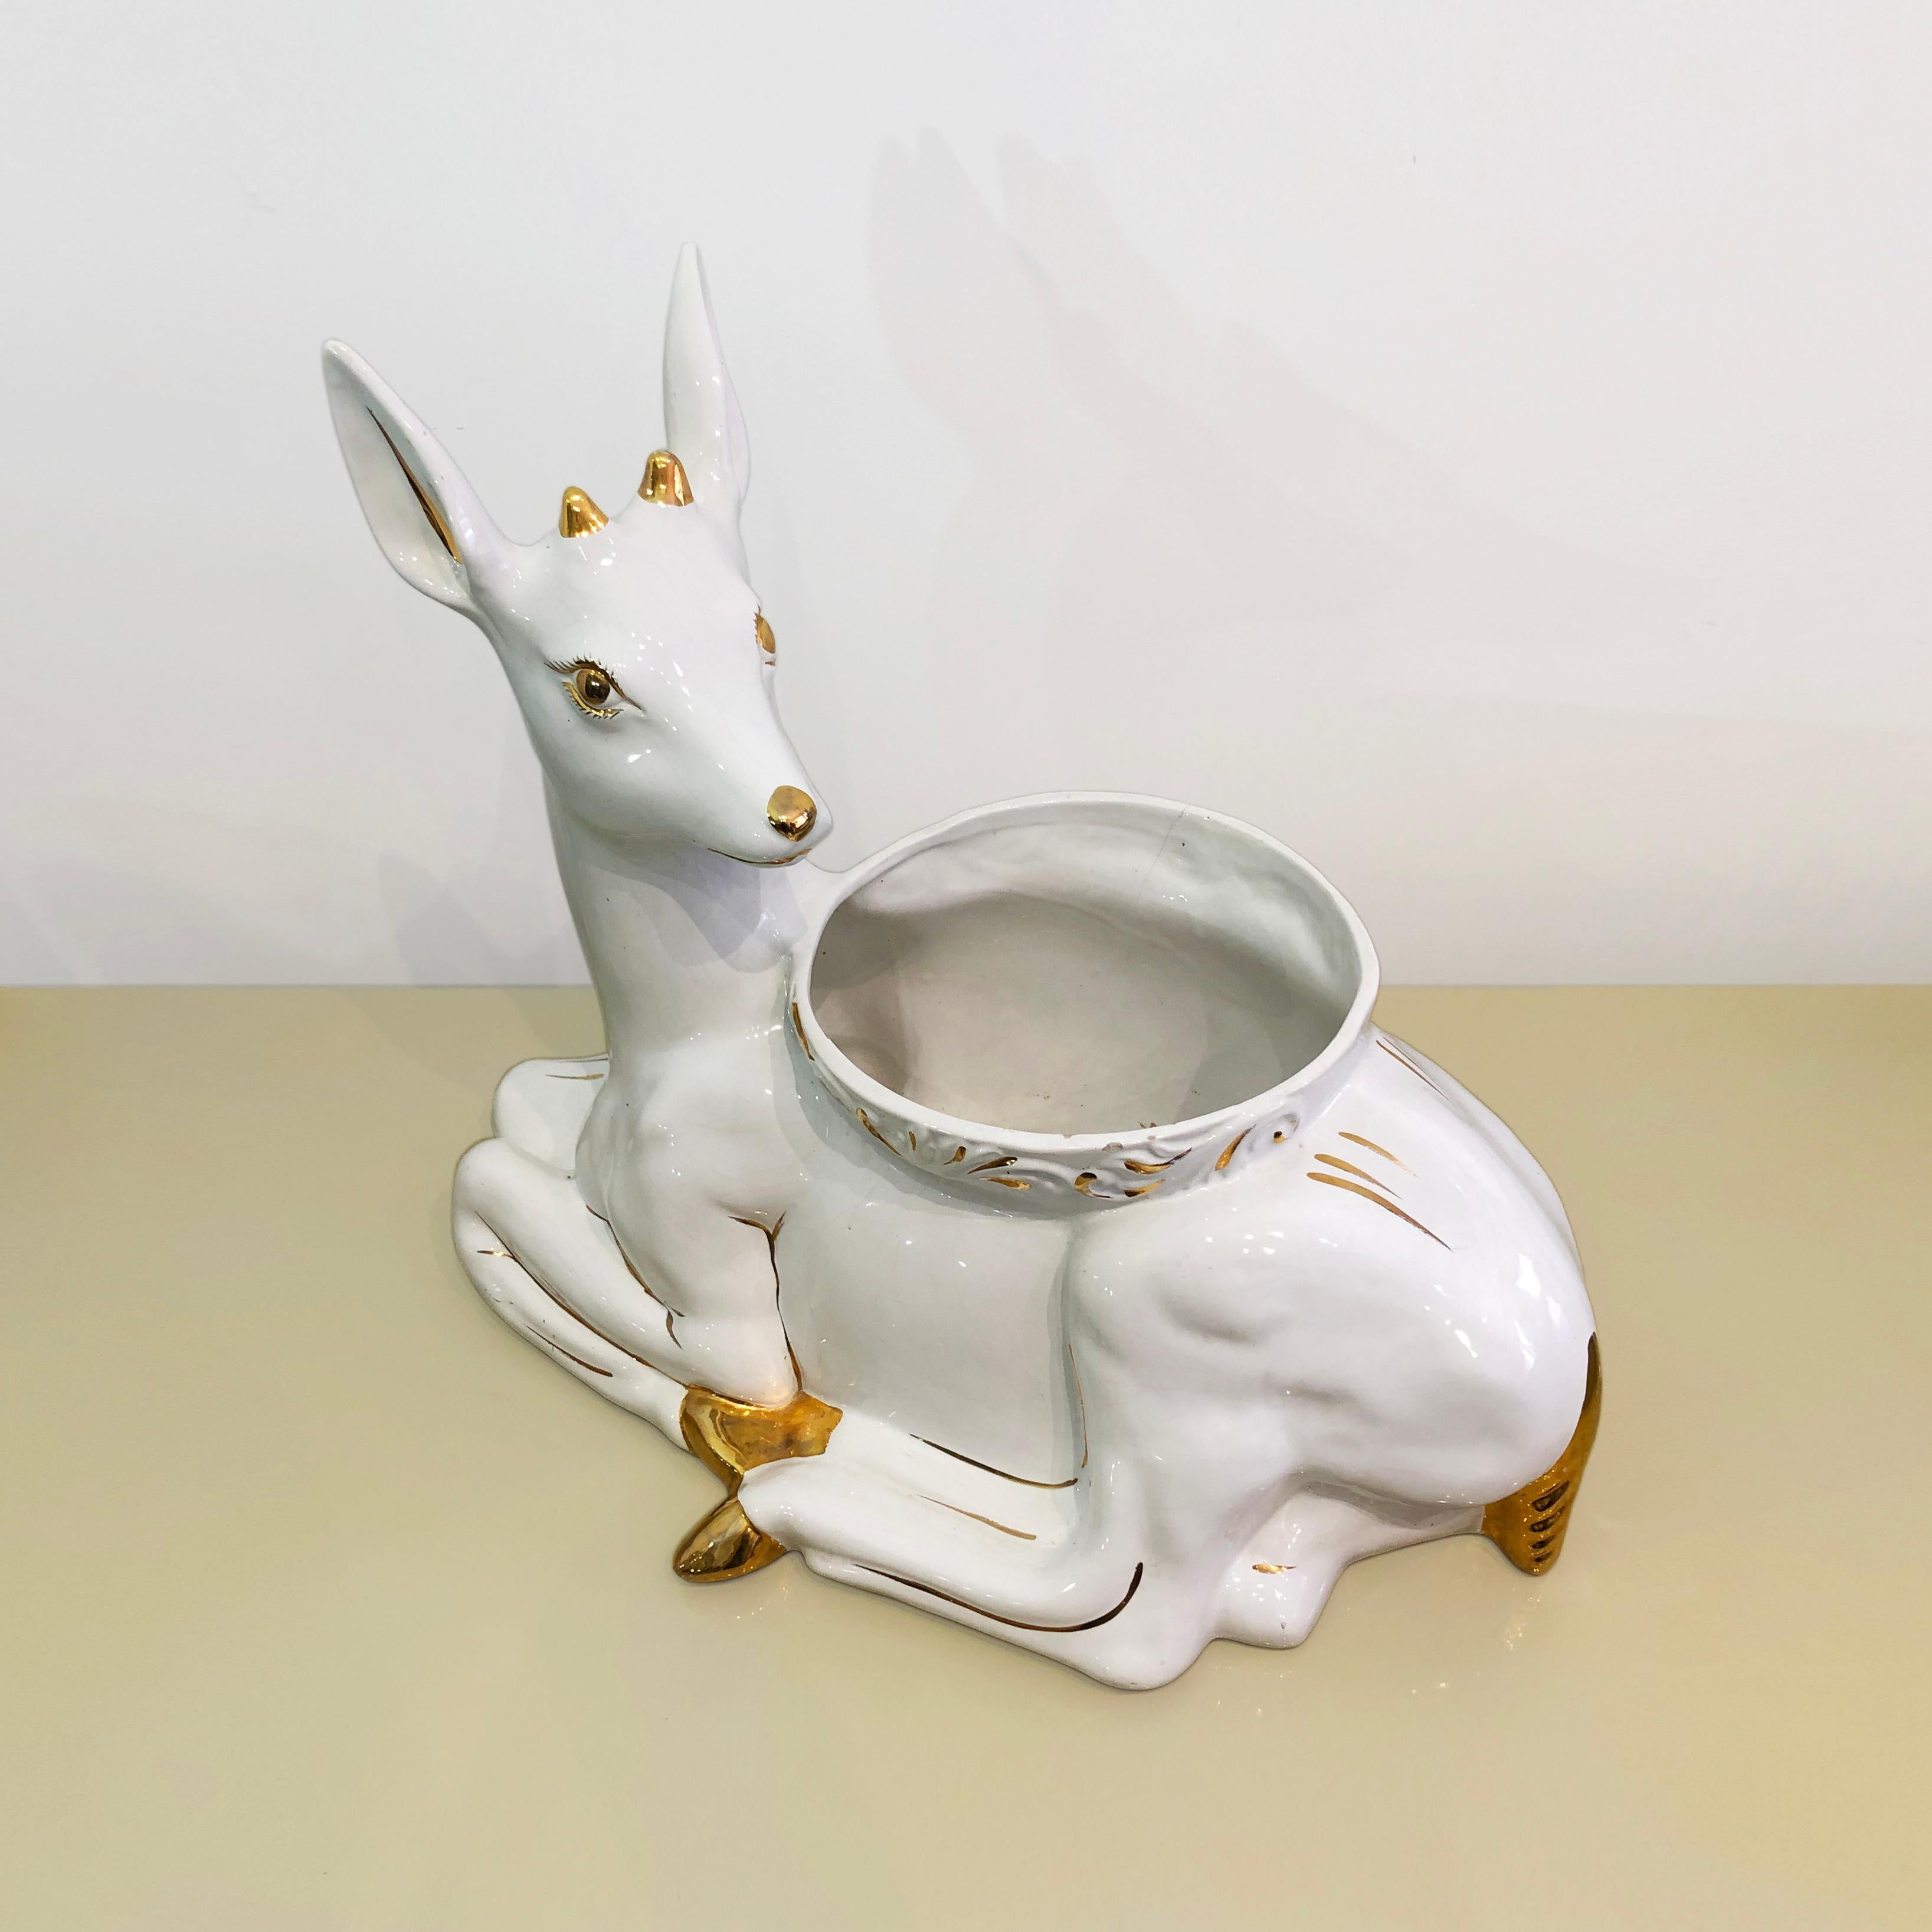 1980s Ceramic Planter Flower Pot Antica Athena Deer Faun White 24k Gold Italian In Good Condition For Sale In London, GB